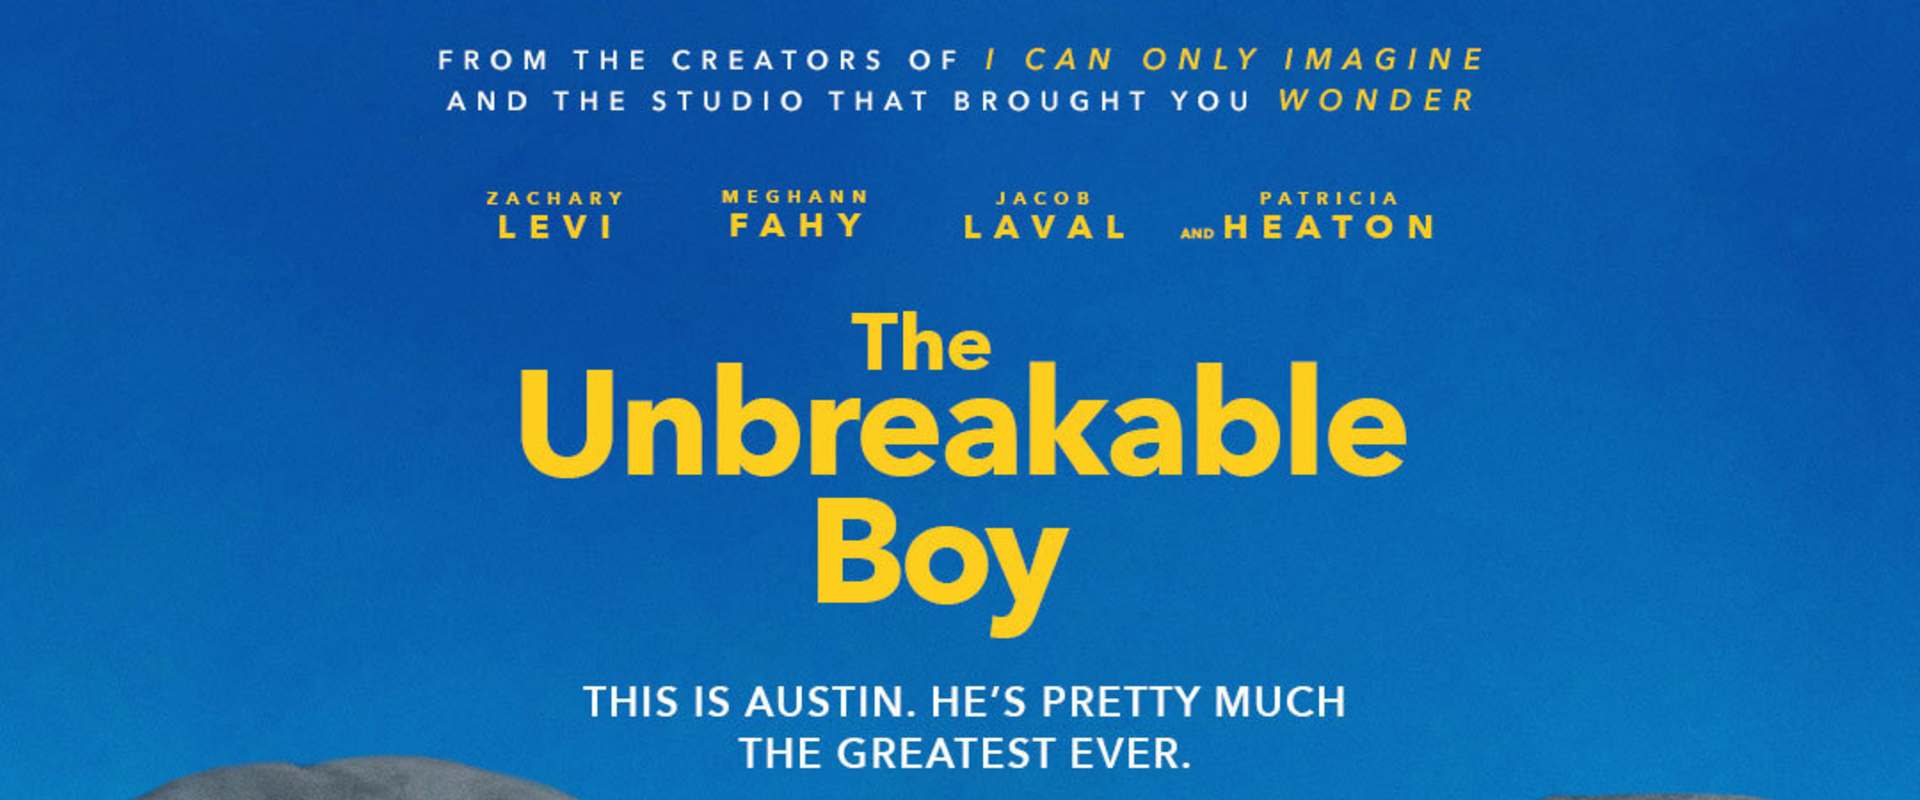 The Unbreakable Boy background 1